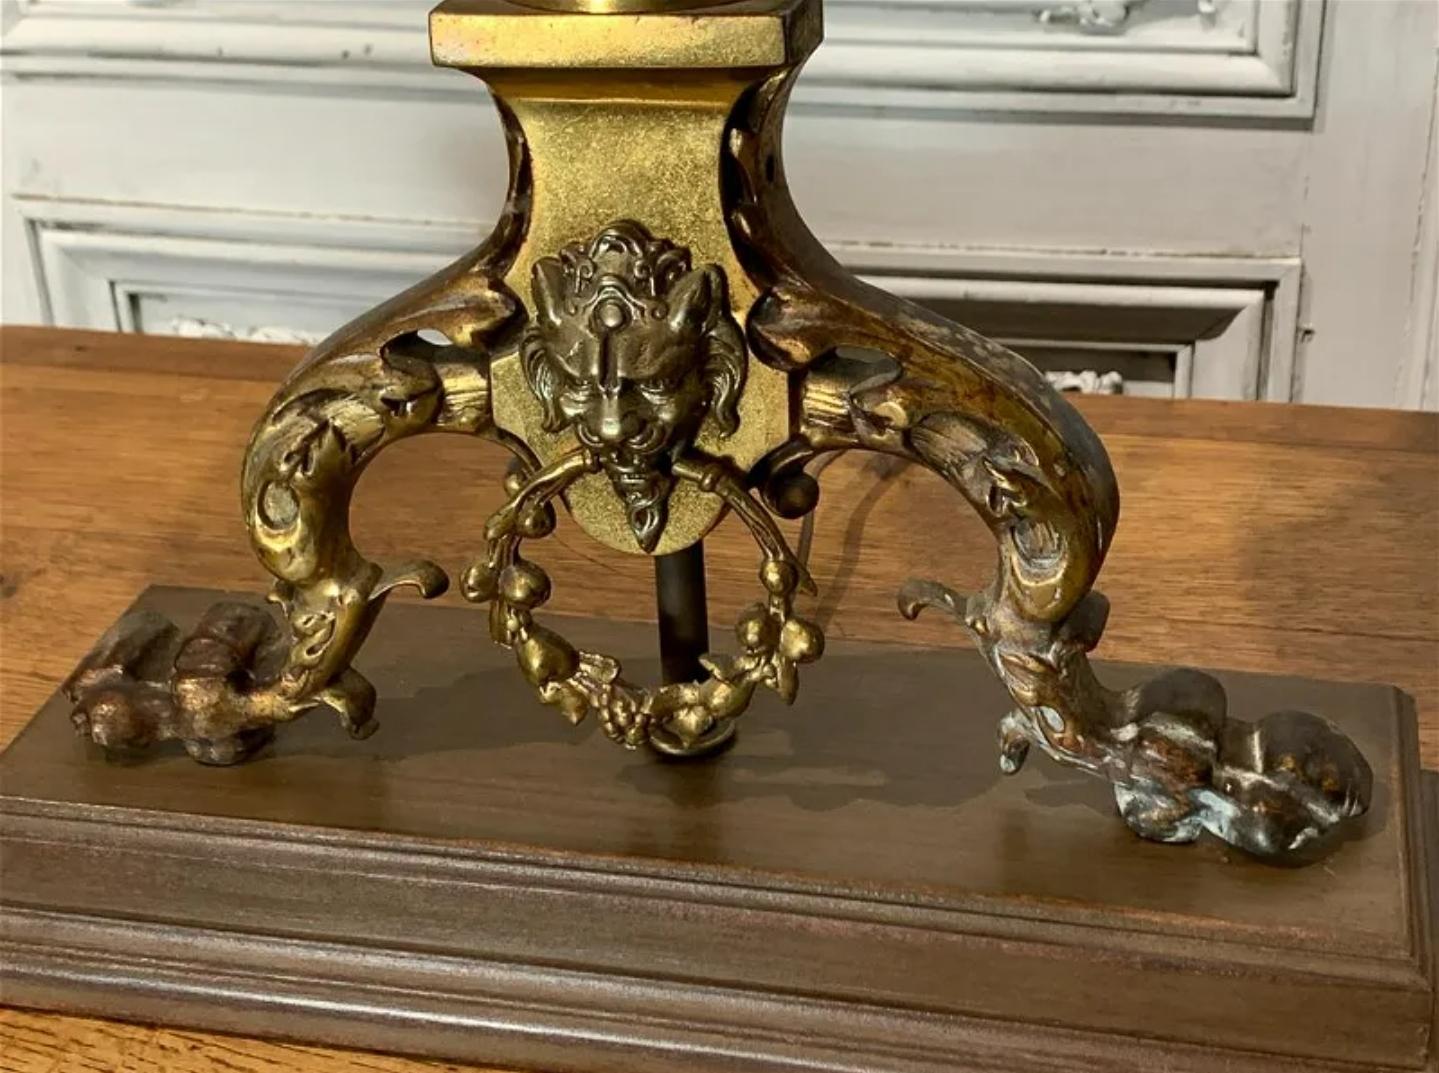 An imposing pair of antique French Victorian Gothic Revival chenets (andirons) fashioned as table lamps.  

Exquisitely hand-crafted in France, 19th c., exceptionally executed Parisian work, most impressive large size, beautifully patinated gilt